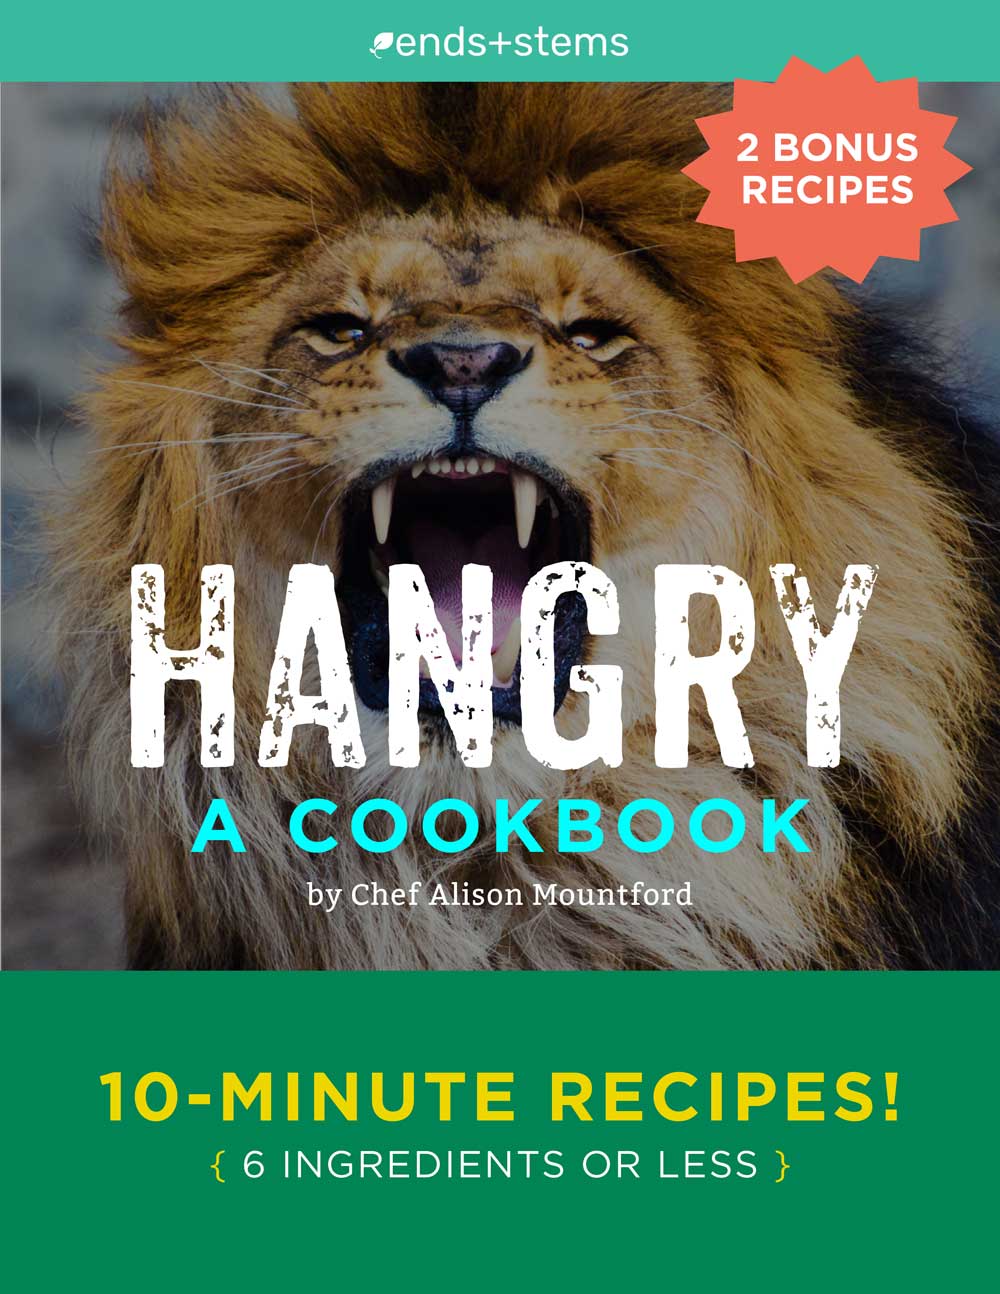 Hangry Cookbook with 2 bonus recipes for Hangry Week!